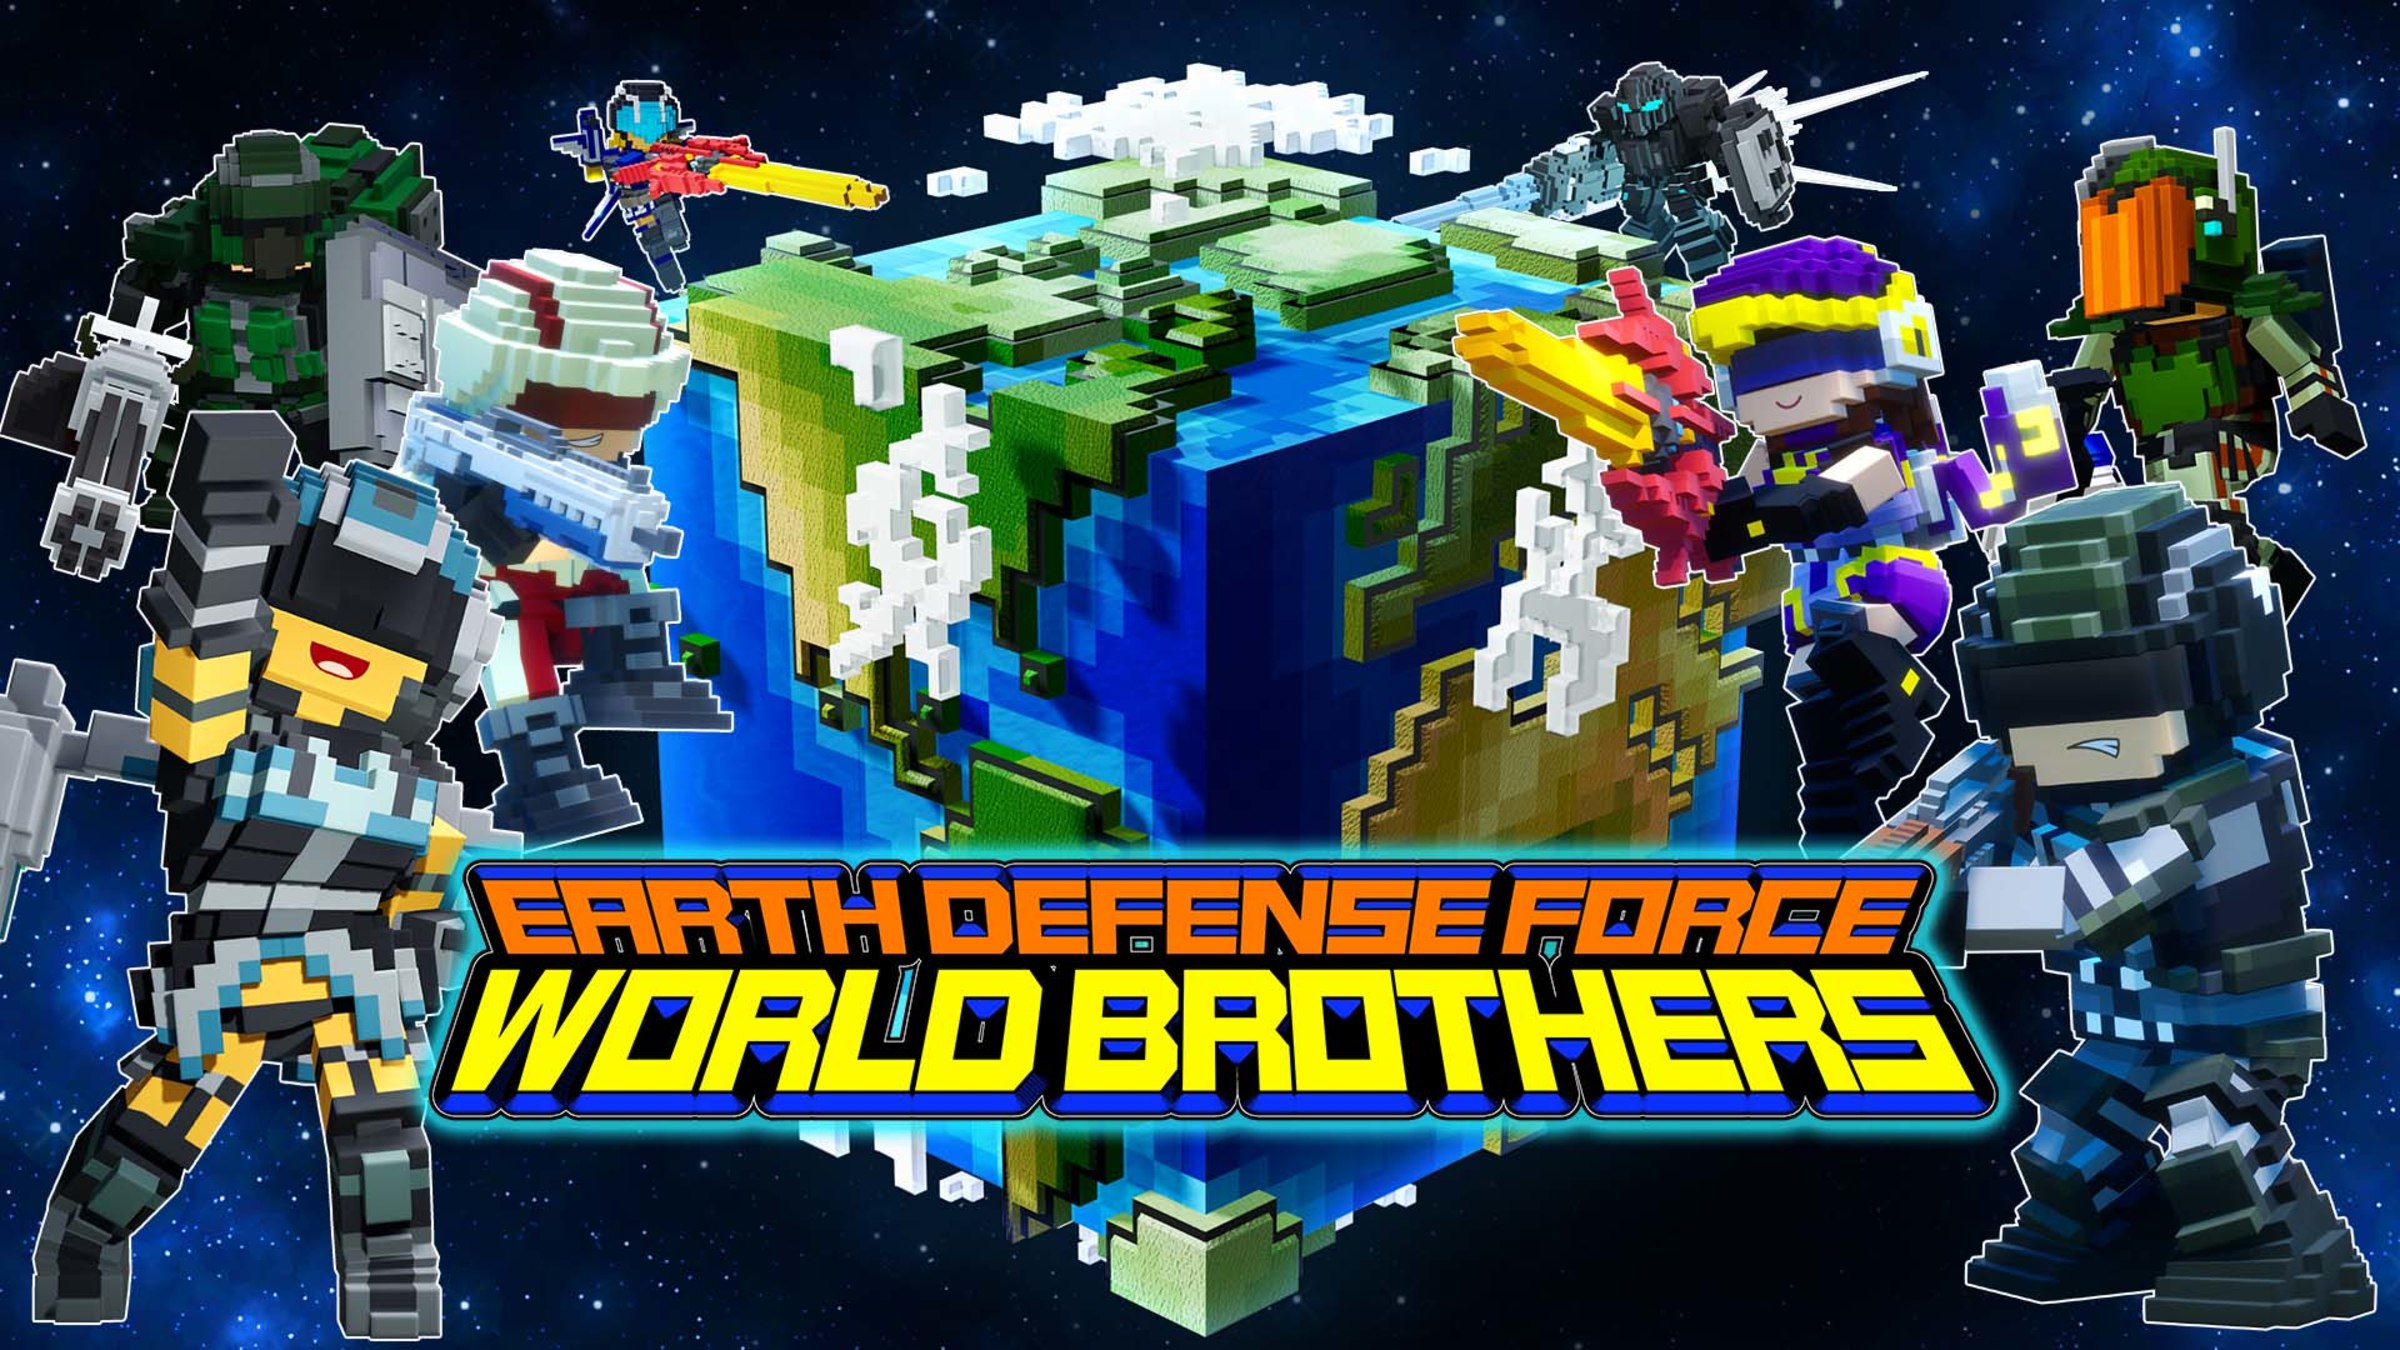 earth-defense-force-world-brothers-site-officiel-nintendo